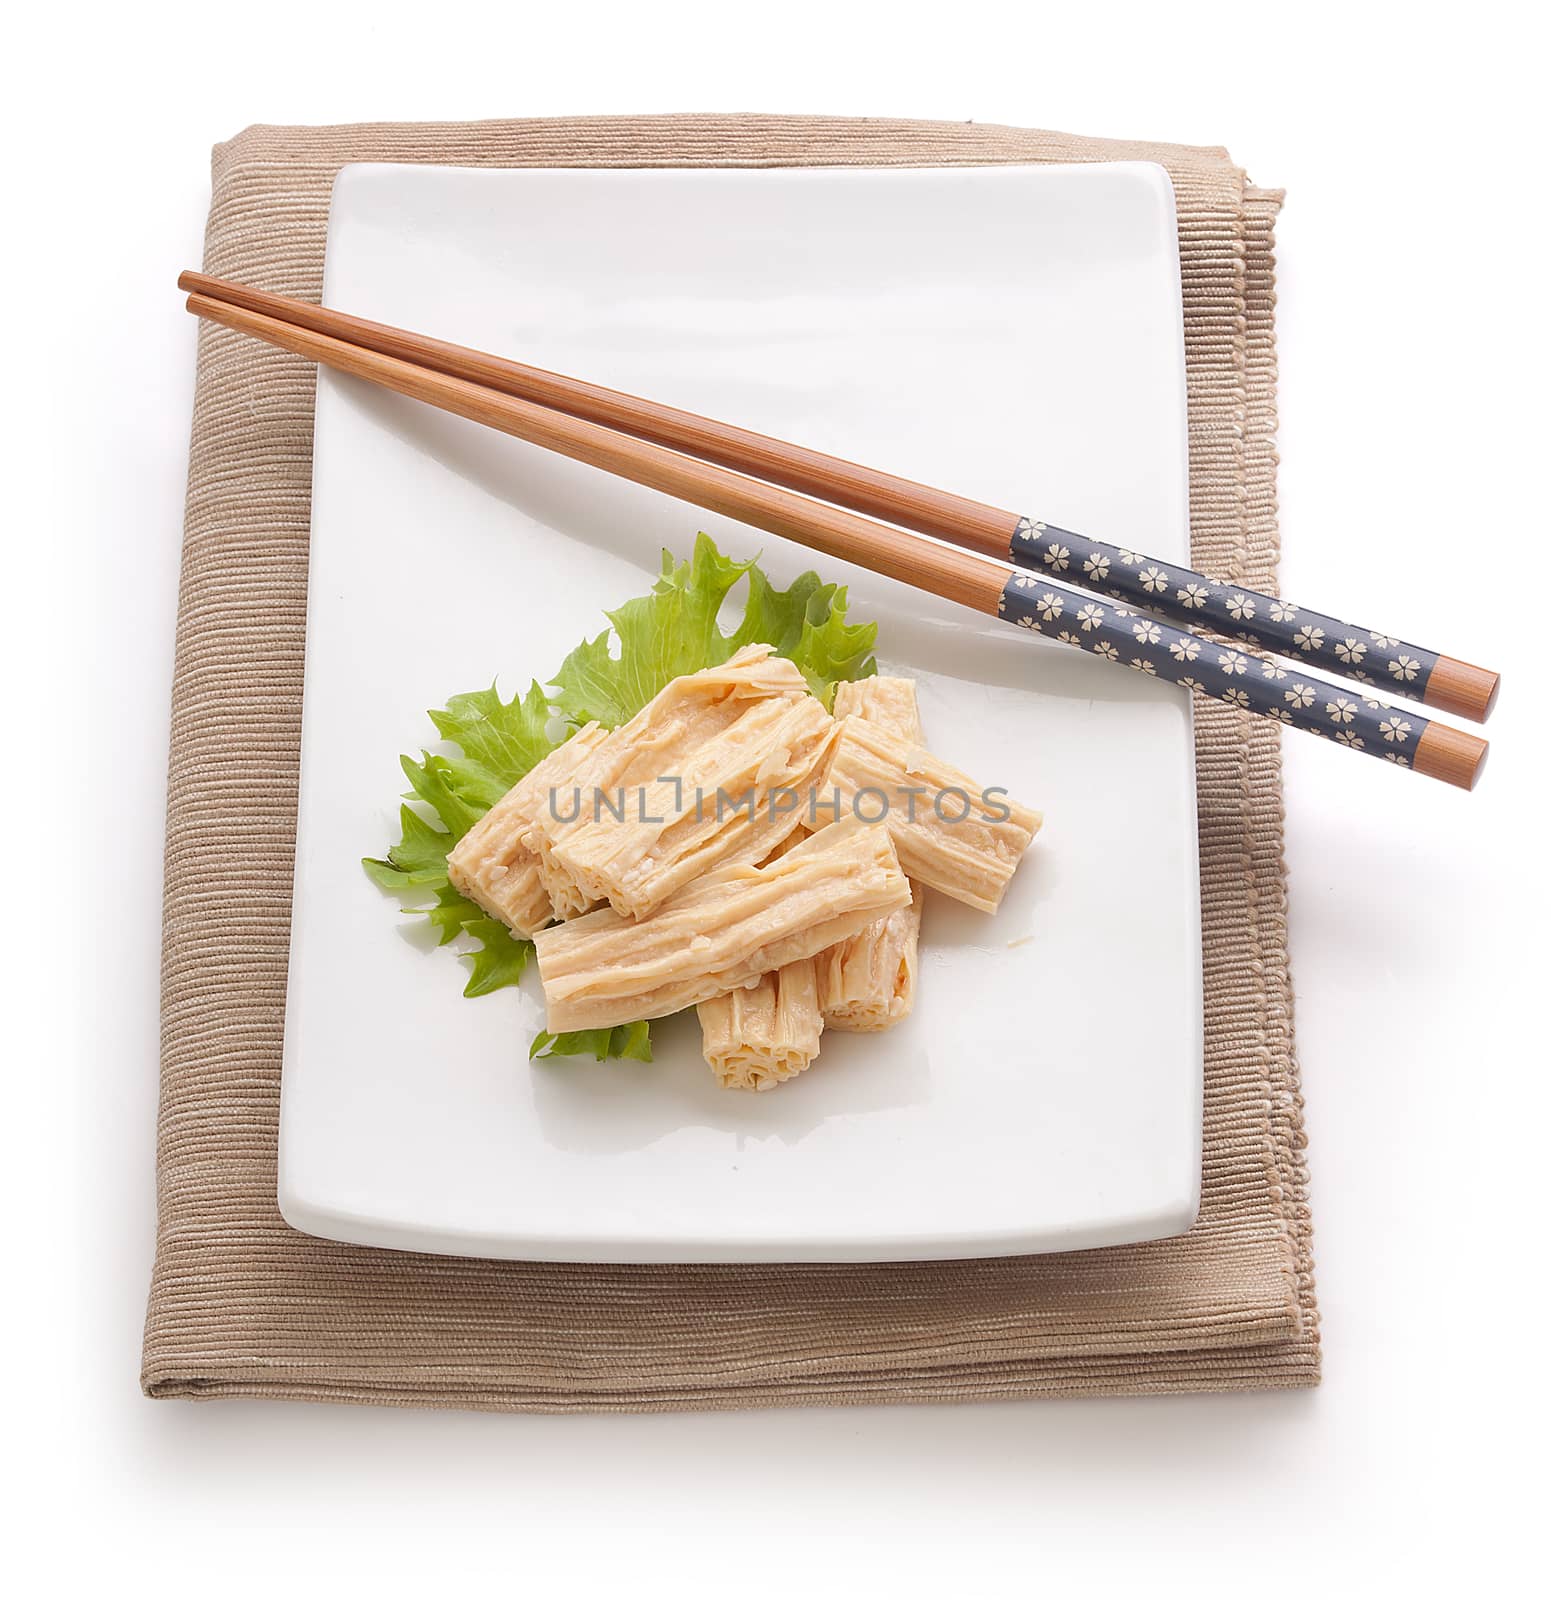 Some pieces of tofu skin with fresh green lettuce and chopstick on the white plate